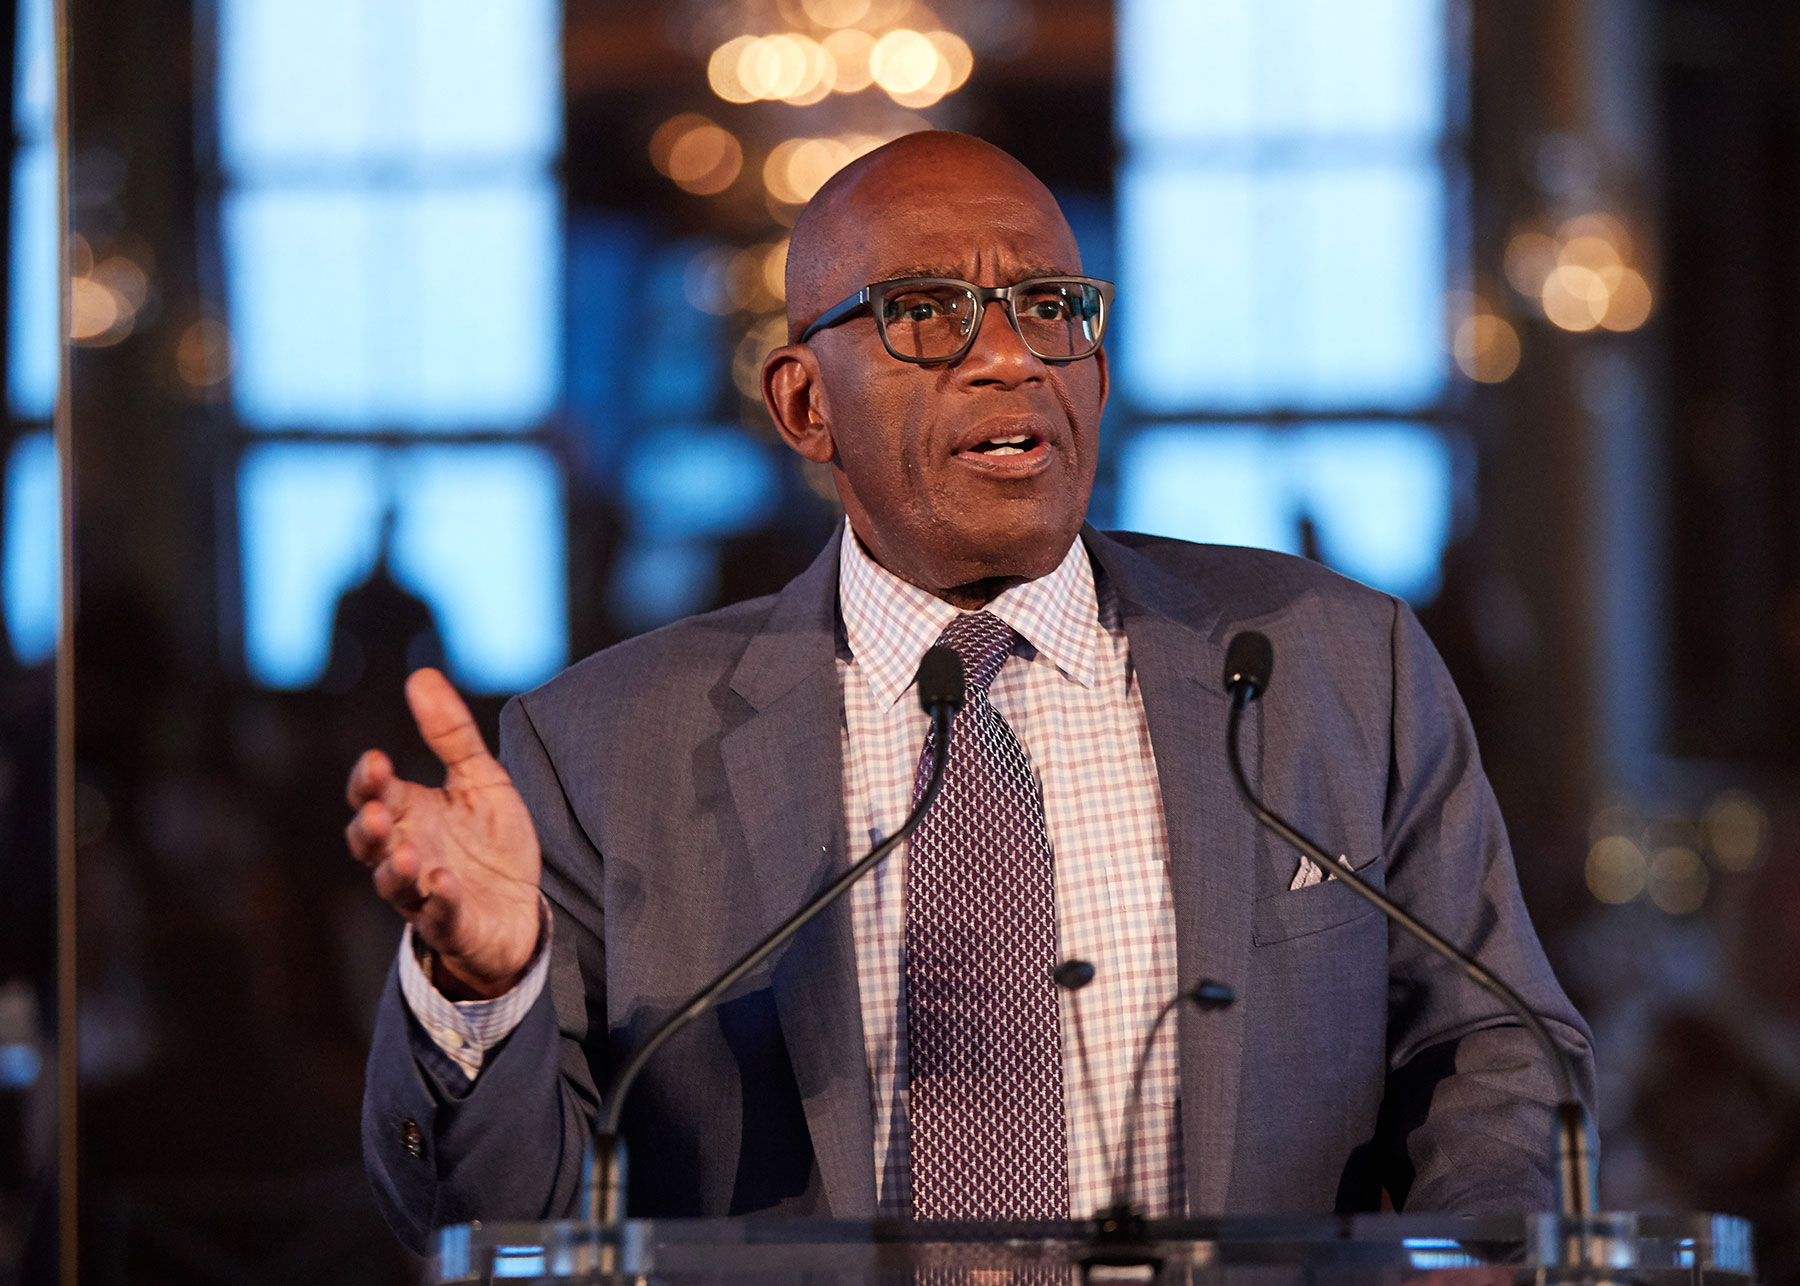 Al Roker speaks at the podium at the EOP 50th anniversary benefit gala in the Rainbow Room in NYC.